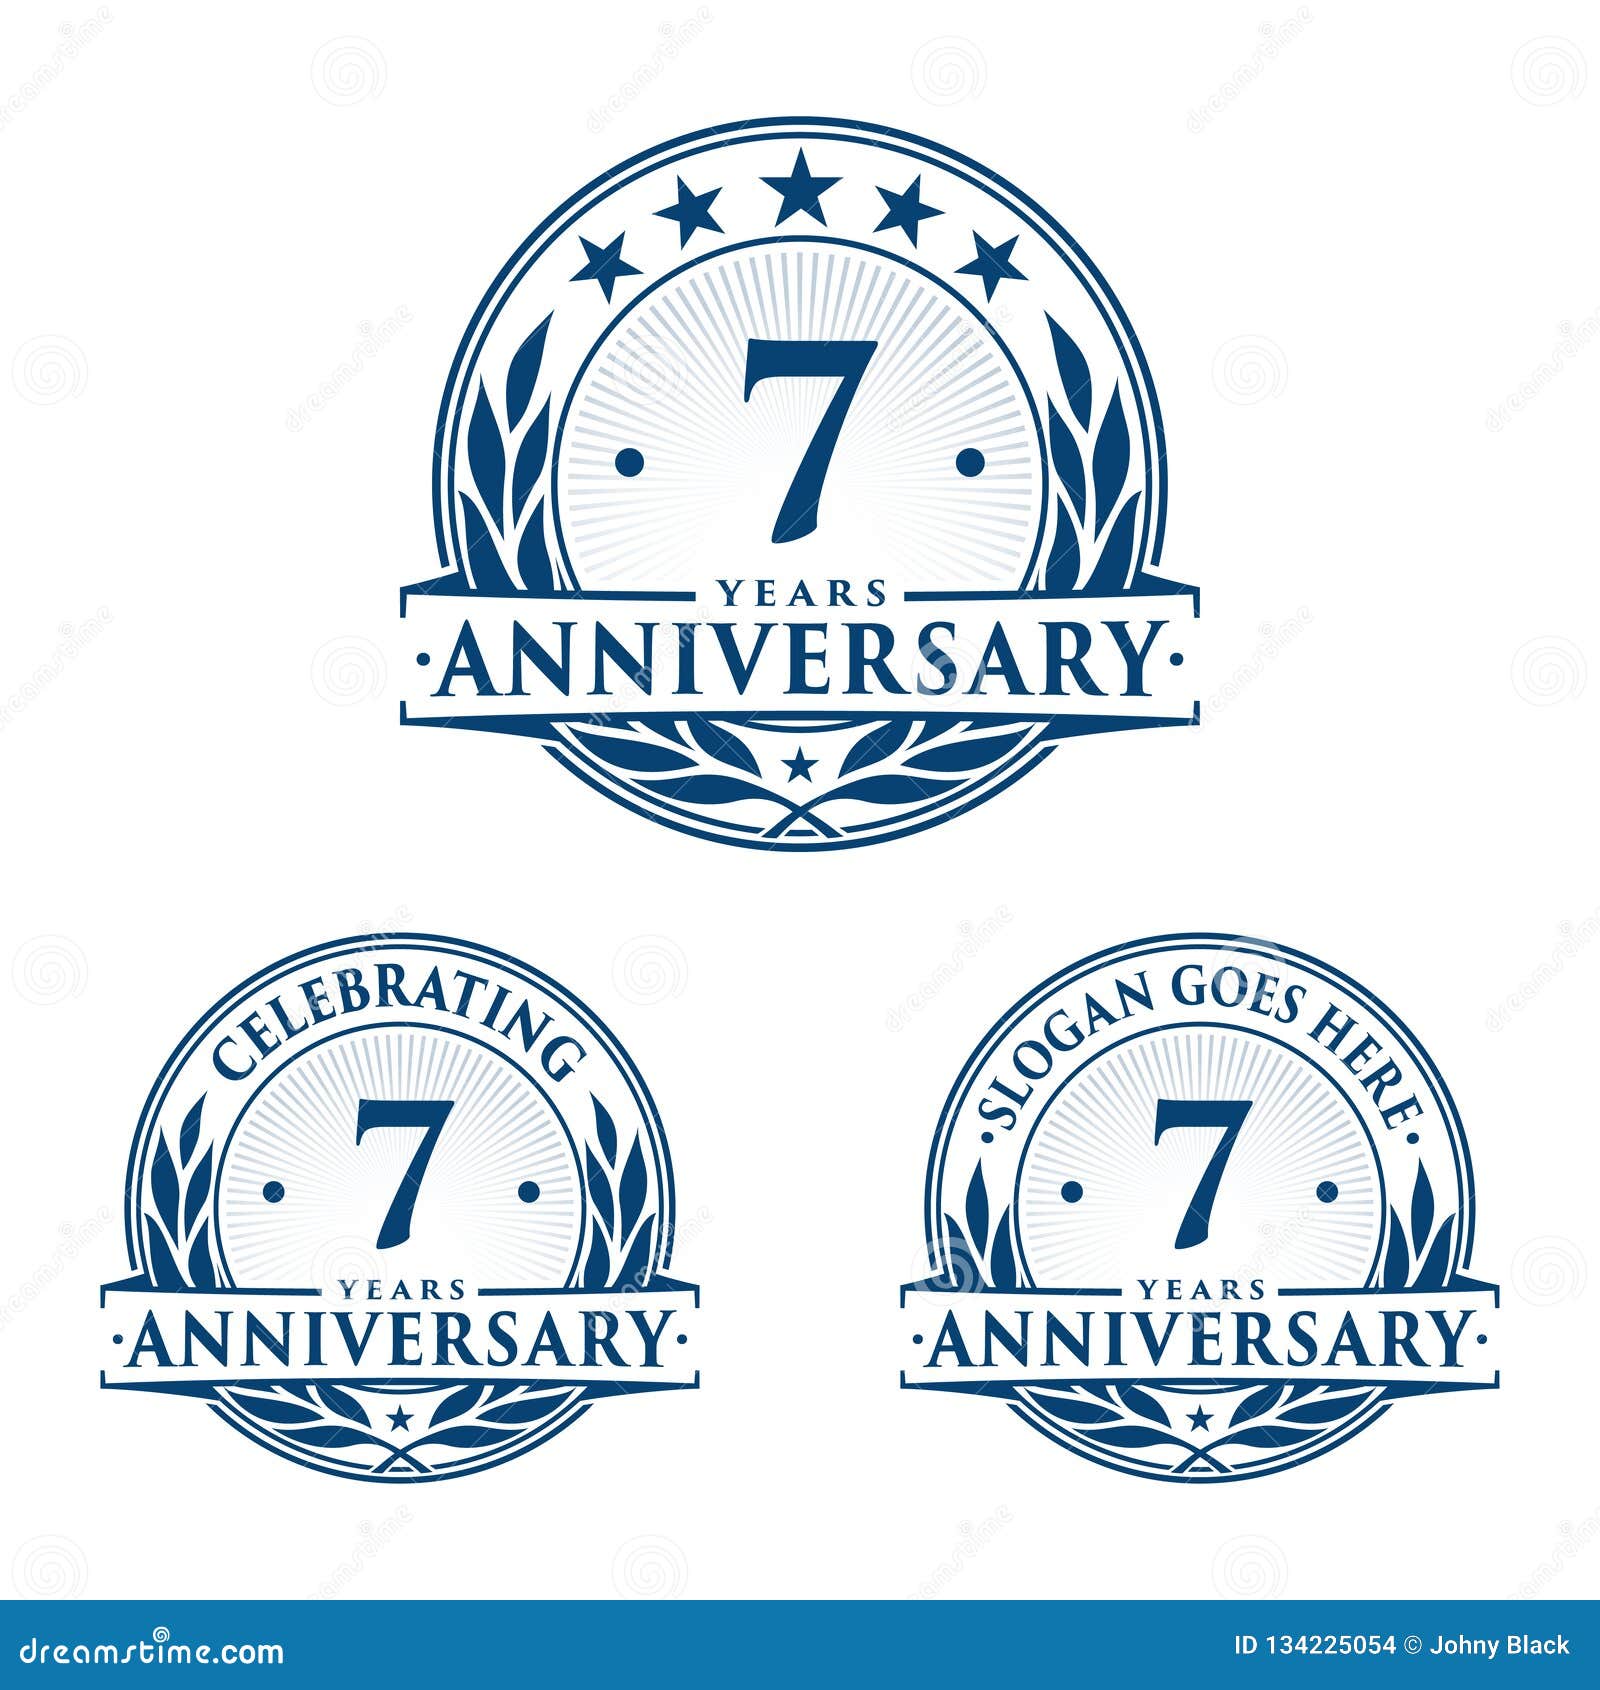 7 Years Anniversary Logo Celebration Card Stock Vector - Illustration of  label, party: 96382190